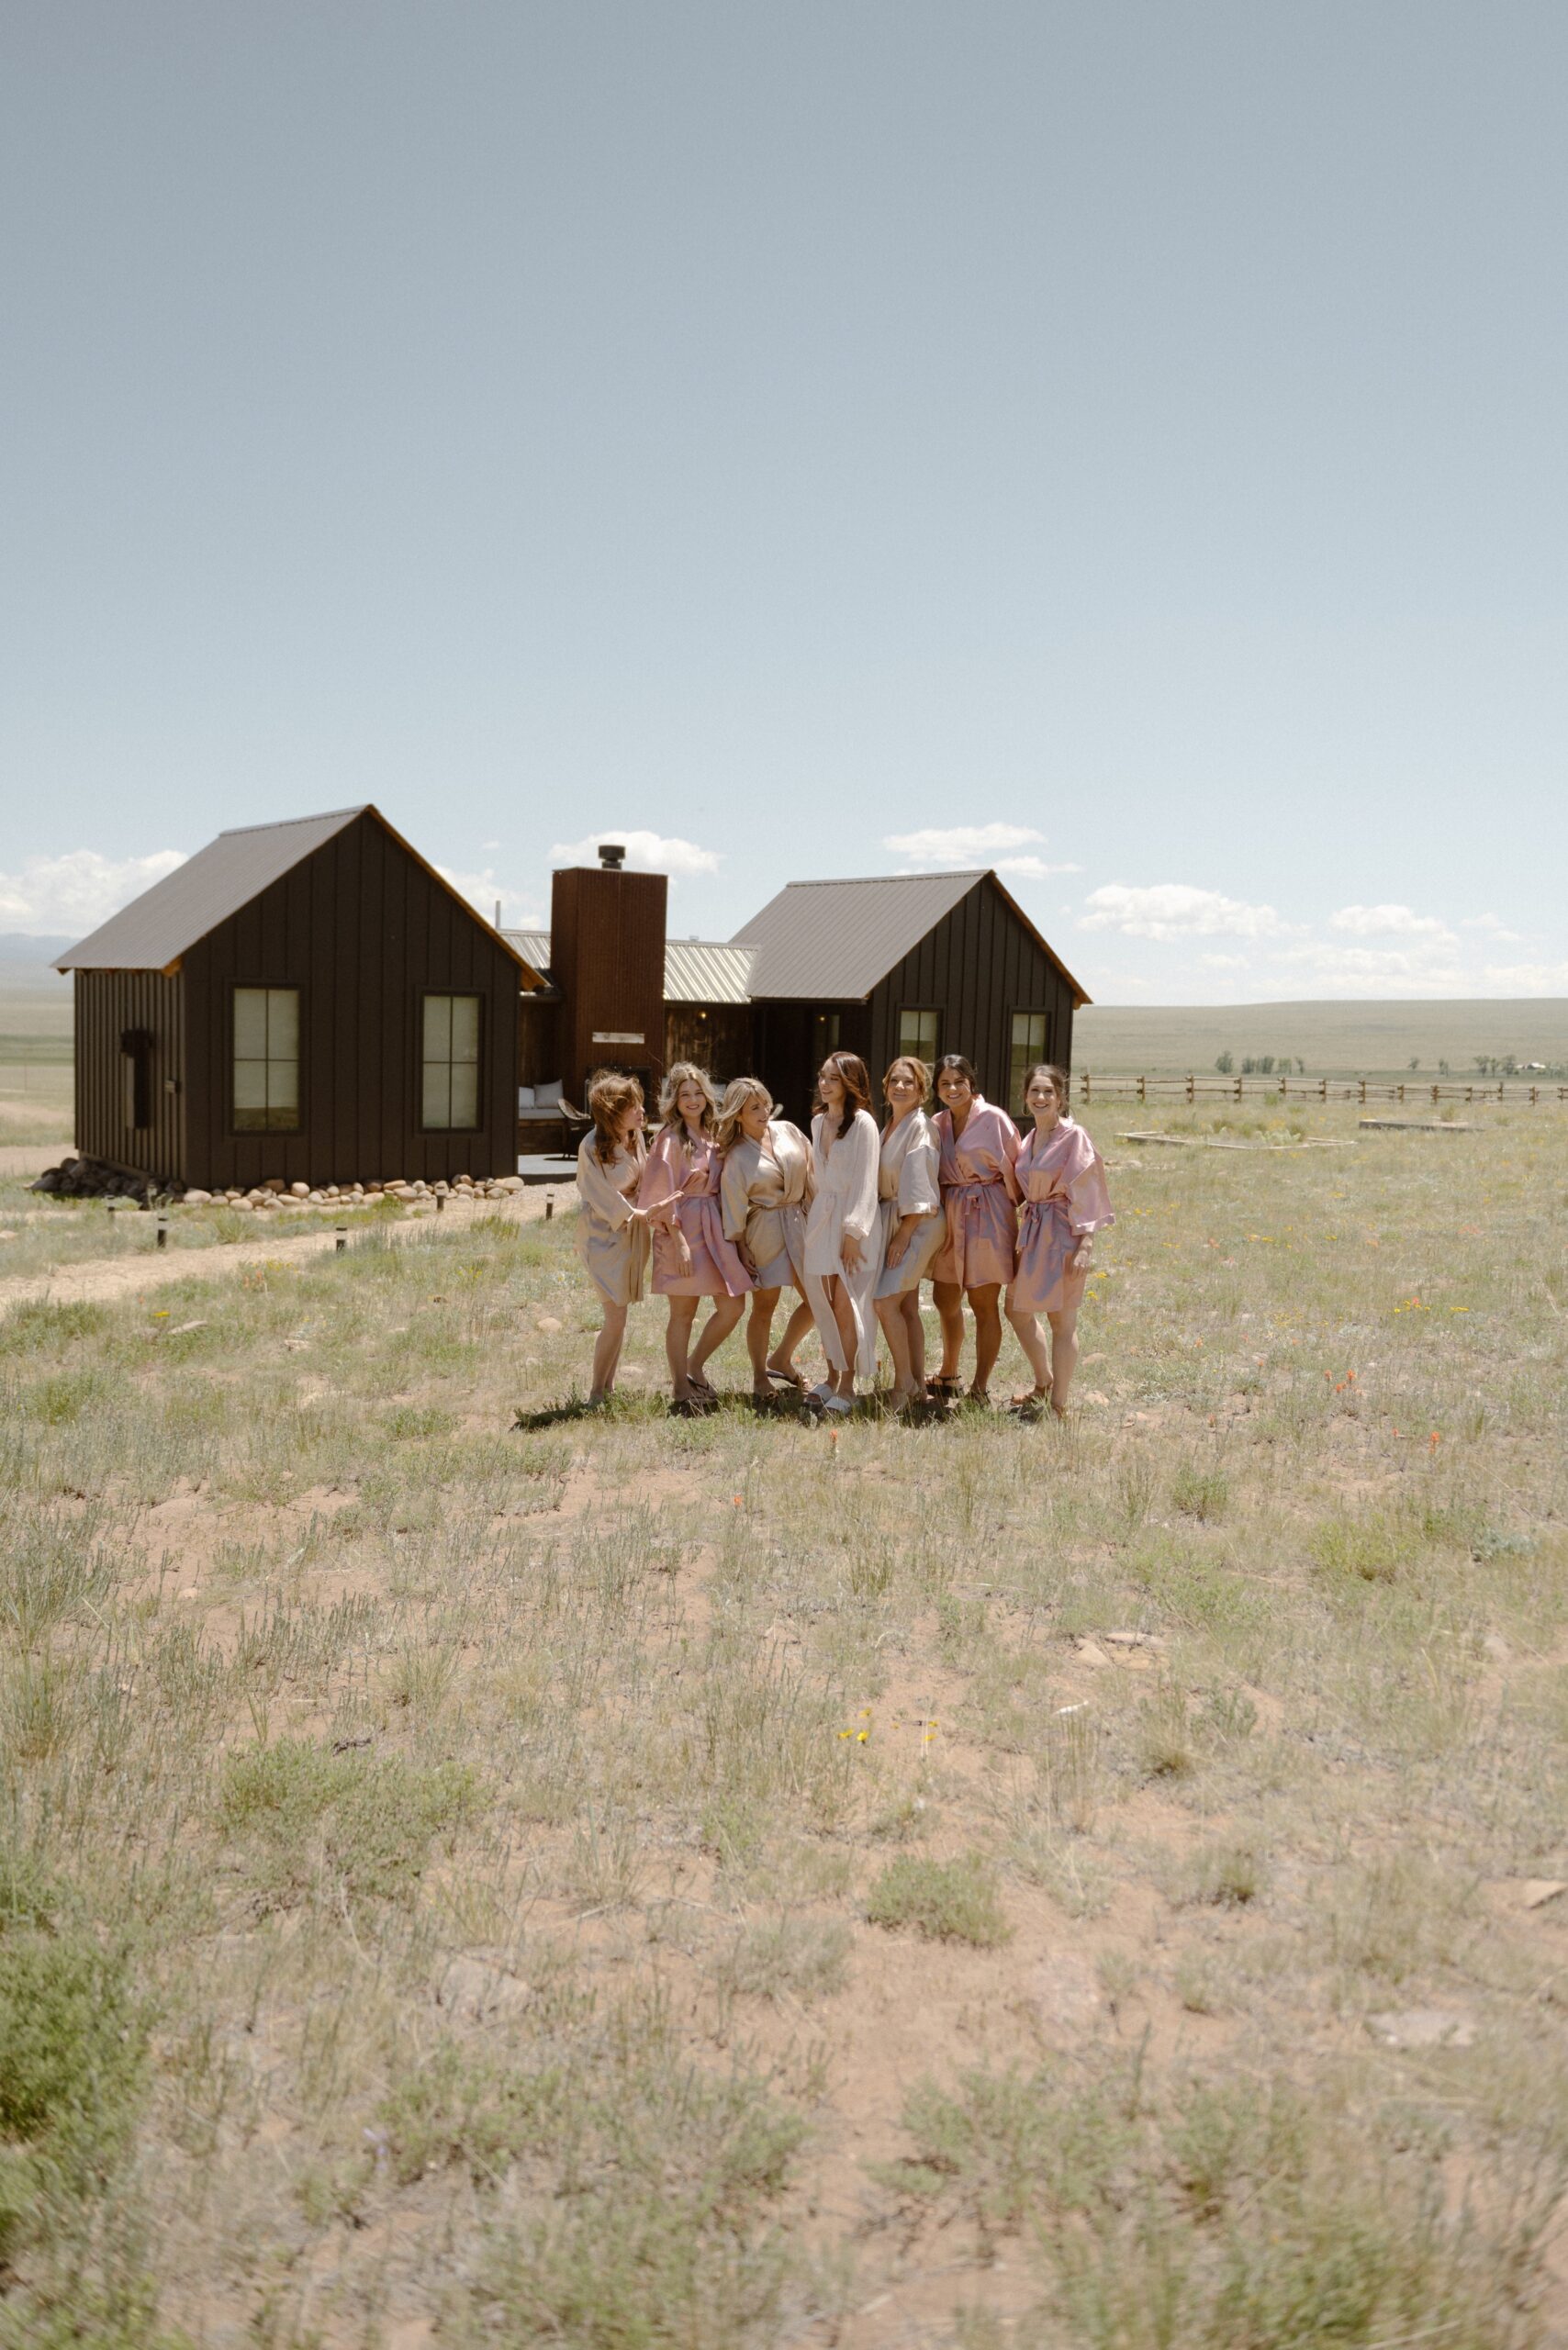 A bride and her bridesmaids and matronly family members stand in the grass field with a cabin in the background. Photo by Ashley Joyce.